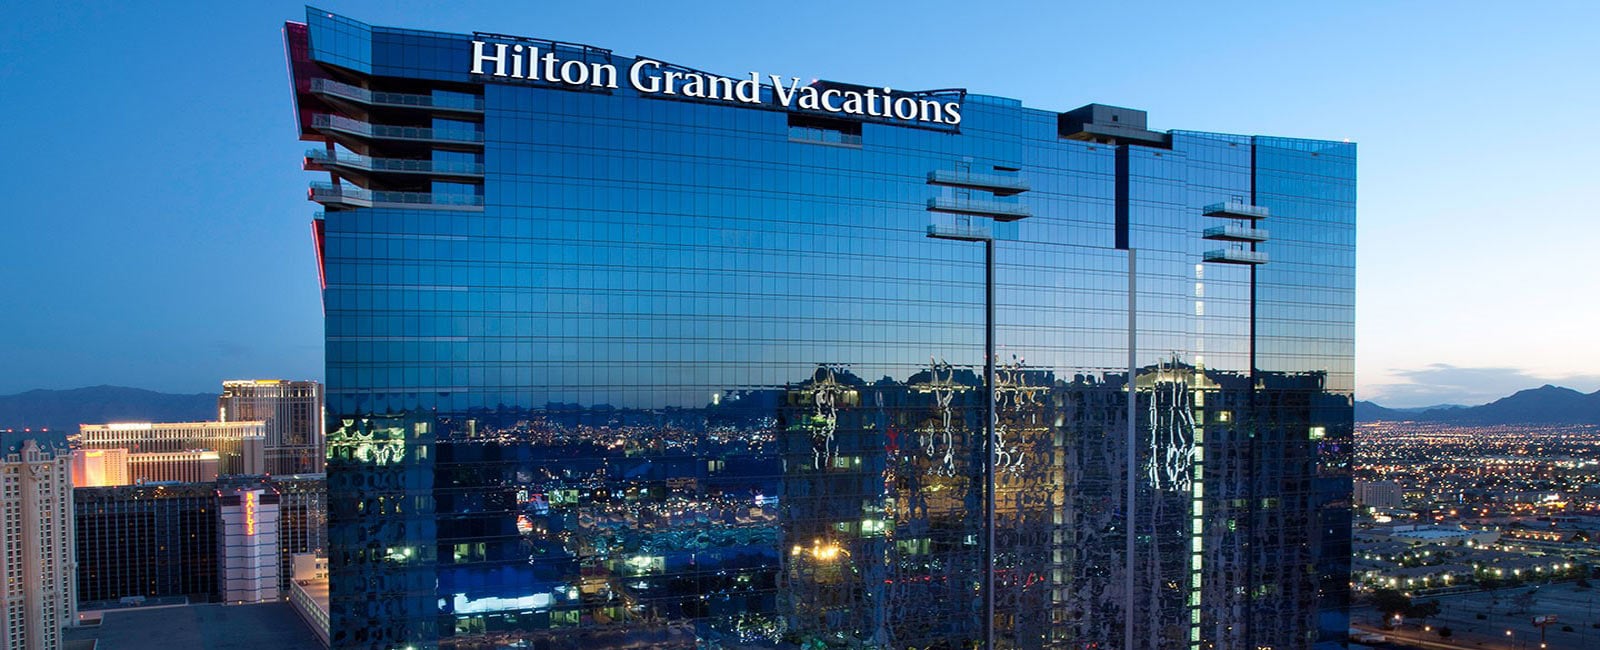 Hilton Grand Vacations Timeshare Presentation Review Points with a Crew